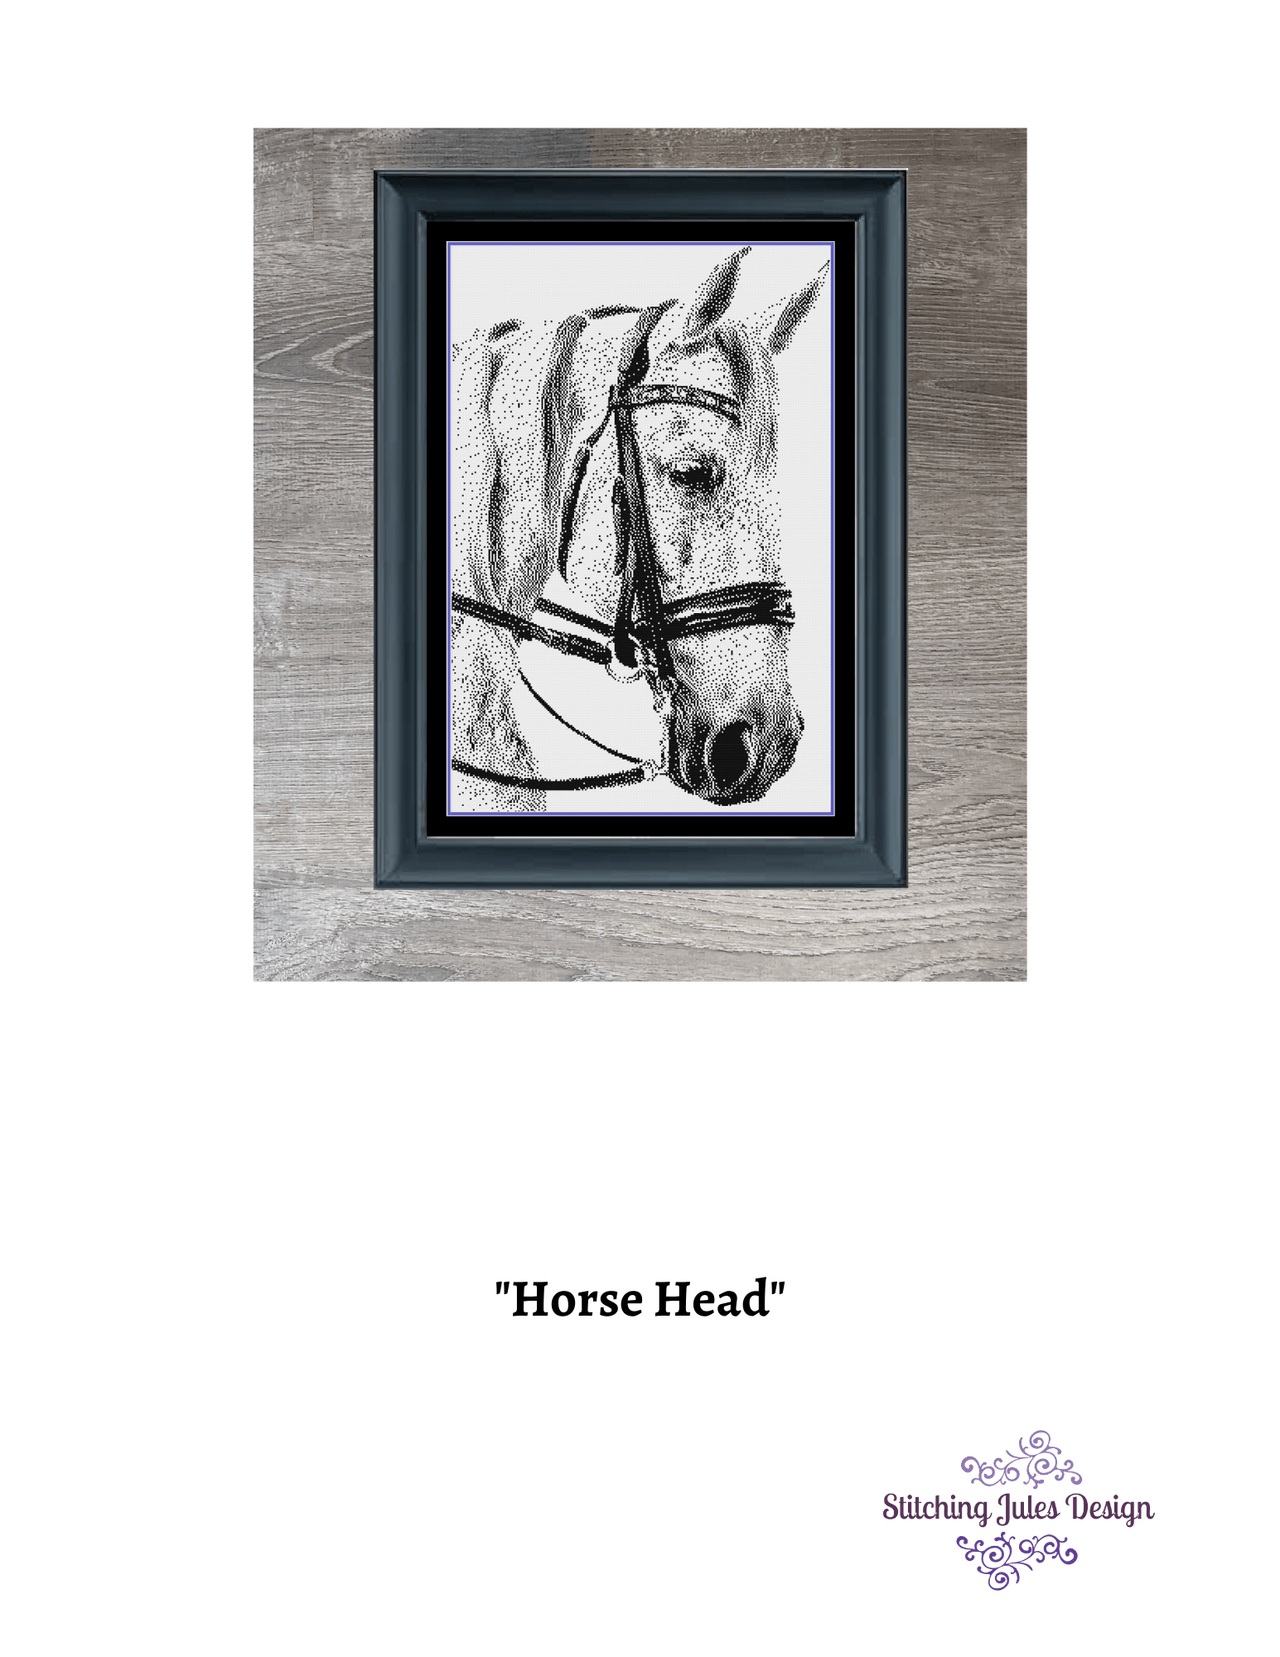 Stitching Jules Design Cross Stitch Pattern Horse Head Equine Animal Monochrome Cross Stitch Needlepoint Embroidery Pattern - Instant Download - Pattern Keeper Ready